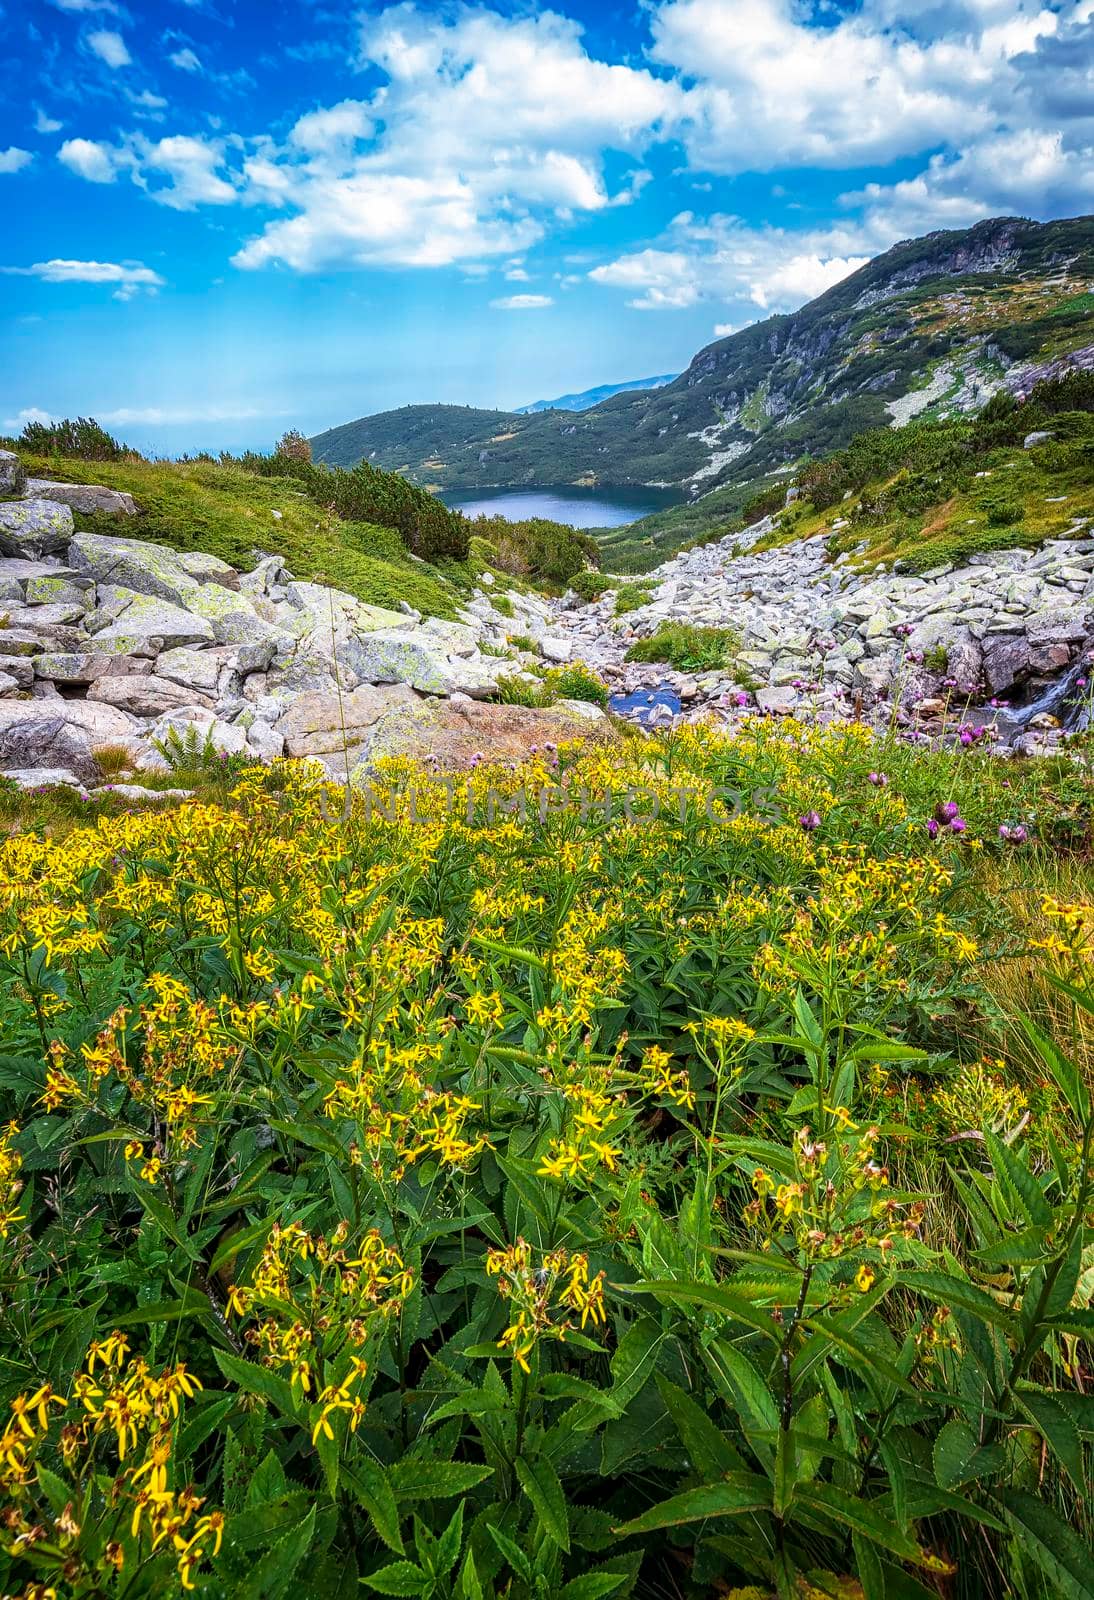 Scenic mountain landscape with yellow flowers, a lake, and rocks.Vertical view by EdVal